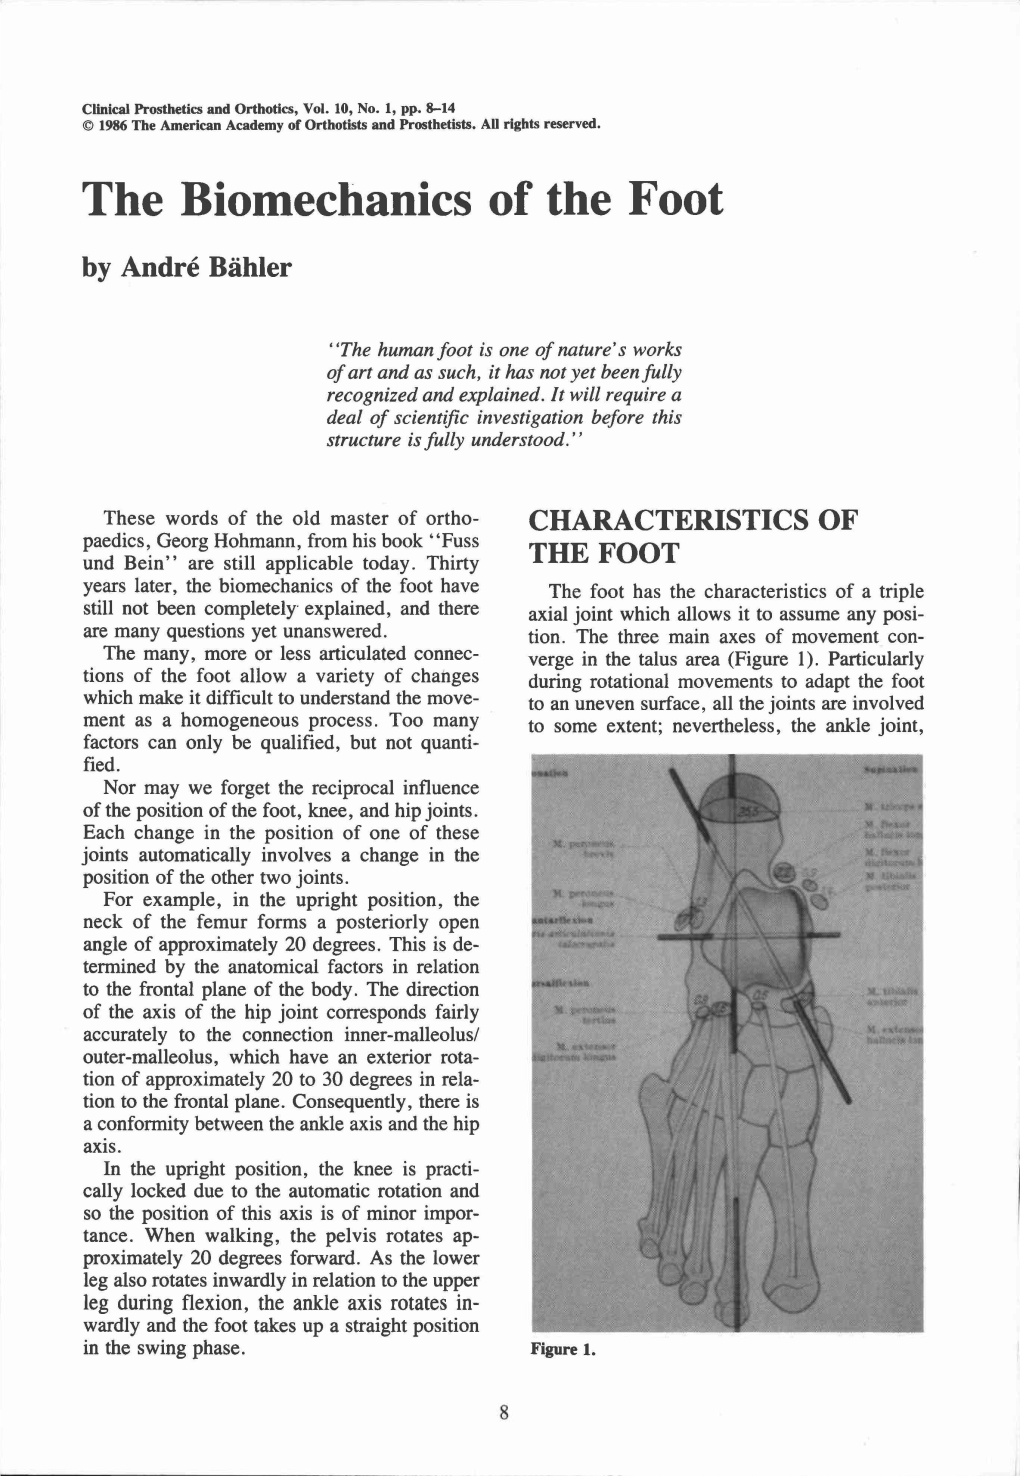 The Biomechanics of the Foot by André Bähler